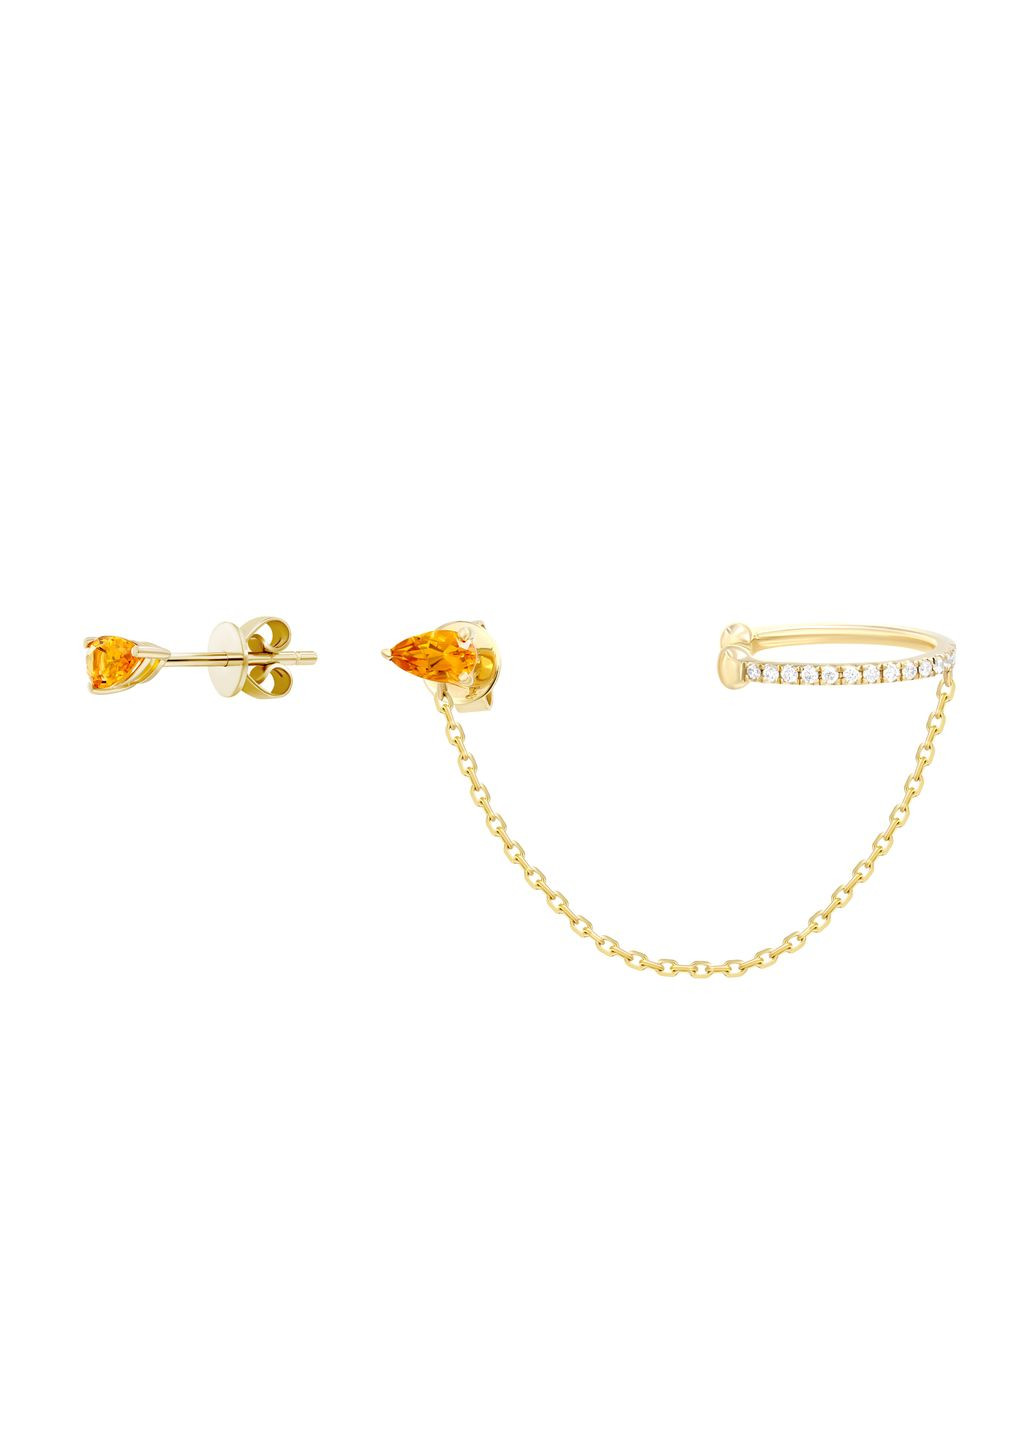 Cuff earrings with diamonds and citrine in yellow gold 1С034ДК-1724 Zarina (278586220)